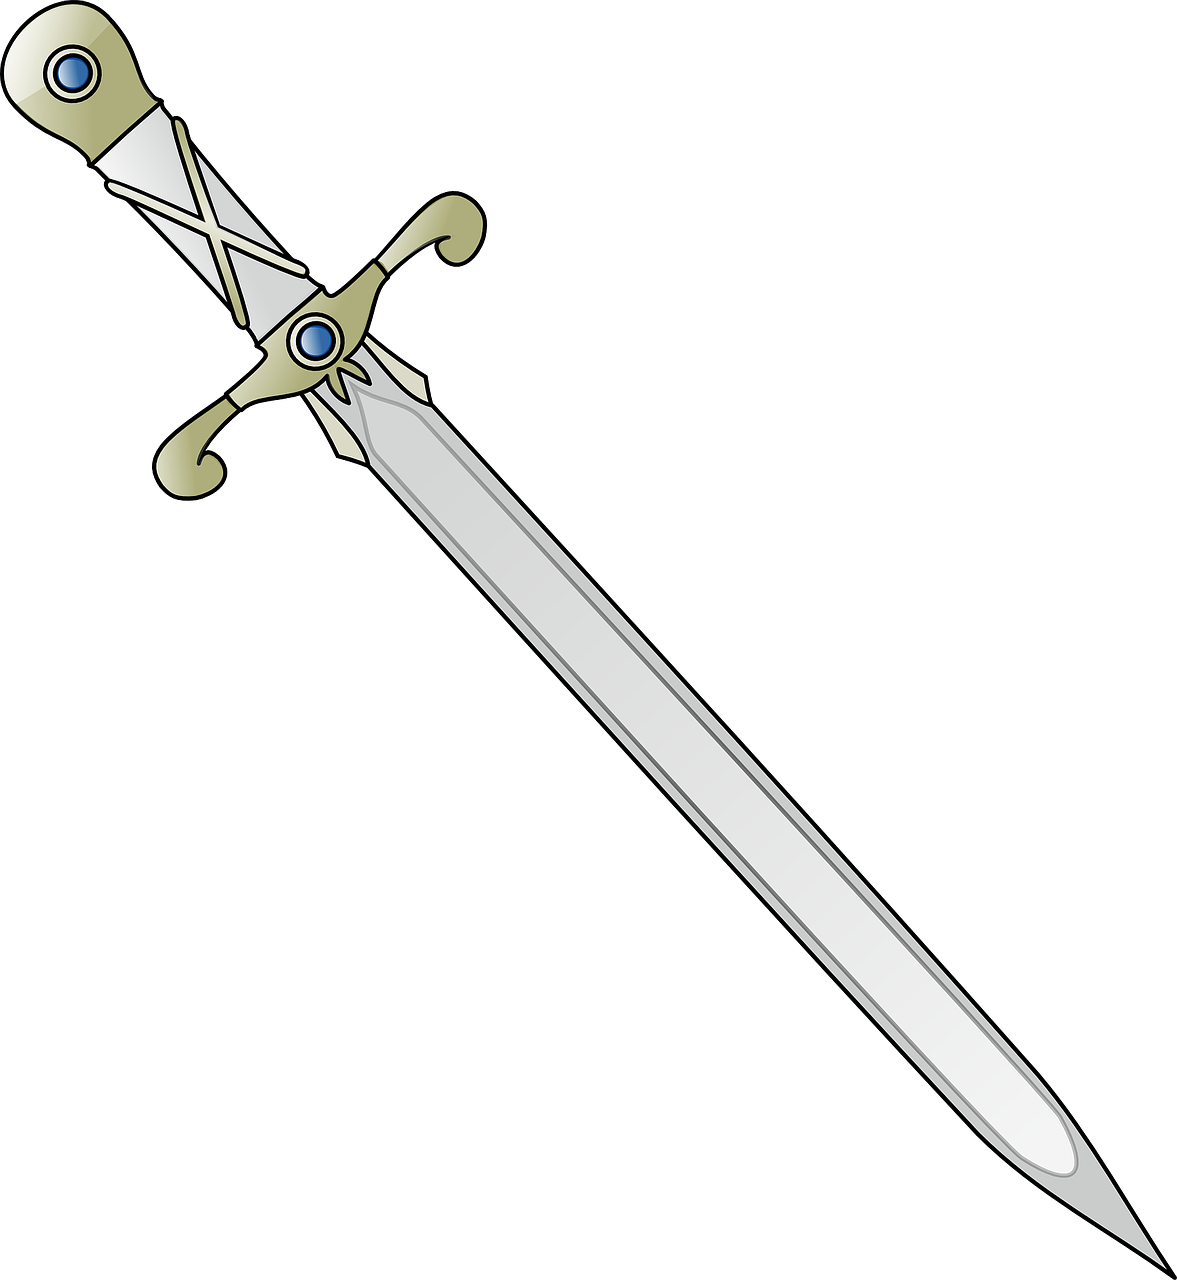 sword blade weapons free photo